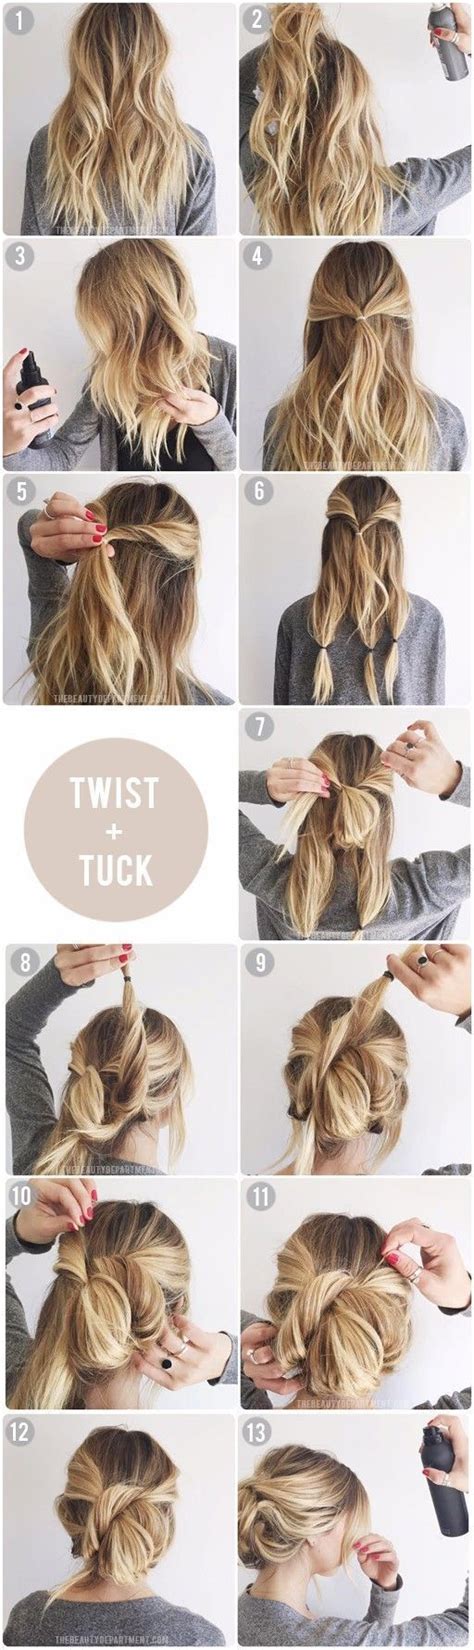 Fresh Cute Simple Ways To Put Your Hair Up Trend This Years Stunning